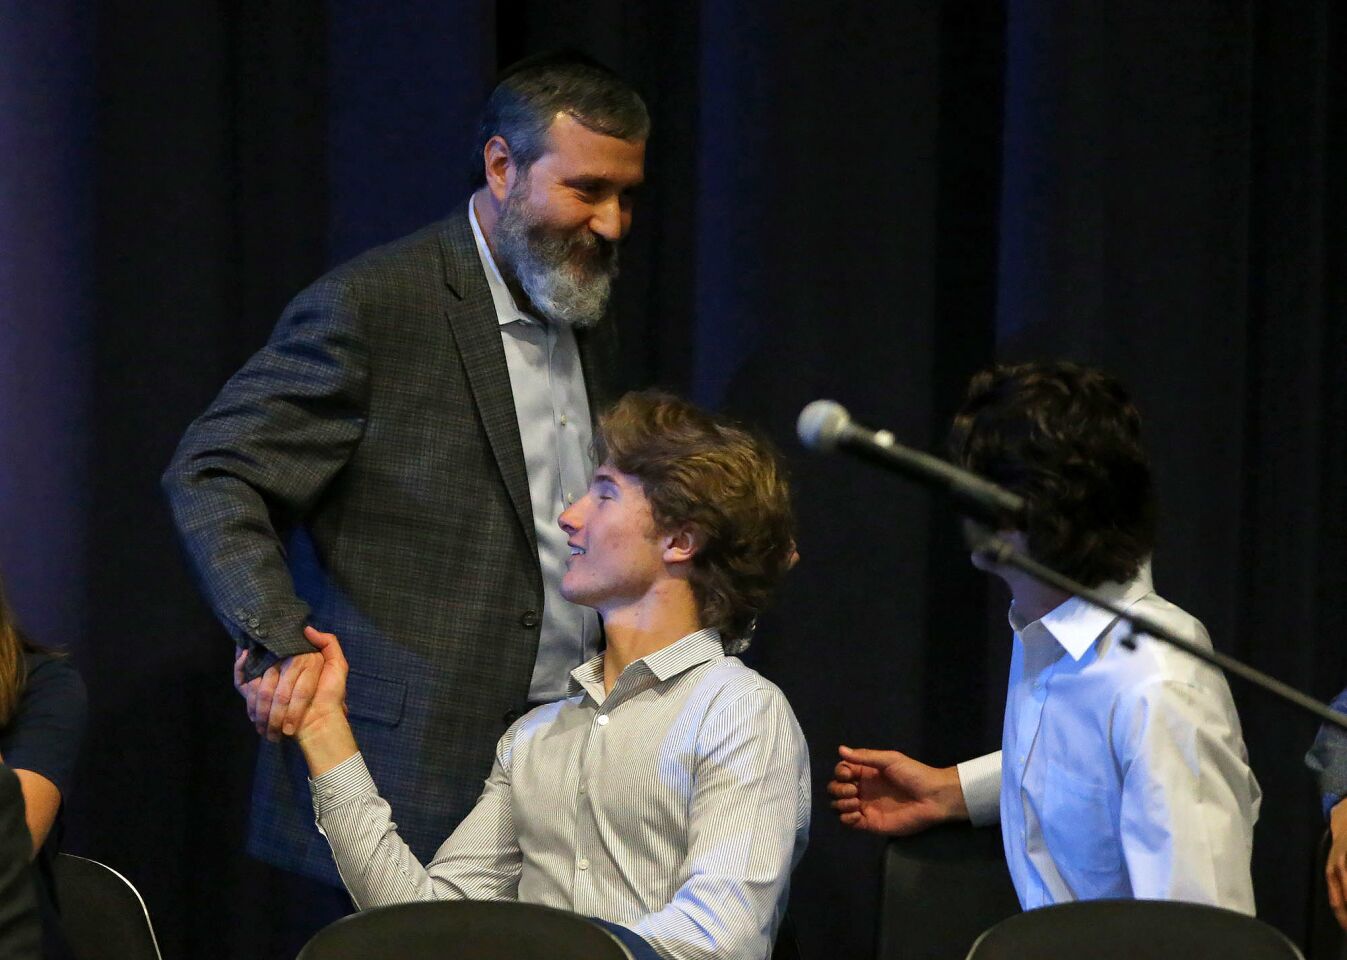 Rabbi Reuven Mintz of the Chabad Center for Jewish Life shakes hands with Newport Harbor High School Associated Student Body President Jack Rogers during a town hall-style meeting Monday night at the school to discuss an off-campus weekend party where students were pictured saluting a swastika made of red cups during a drinking game.